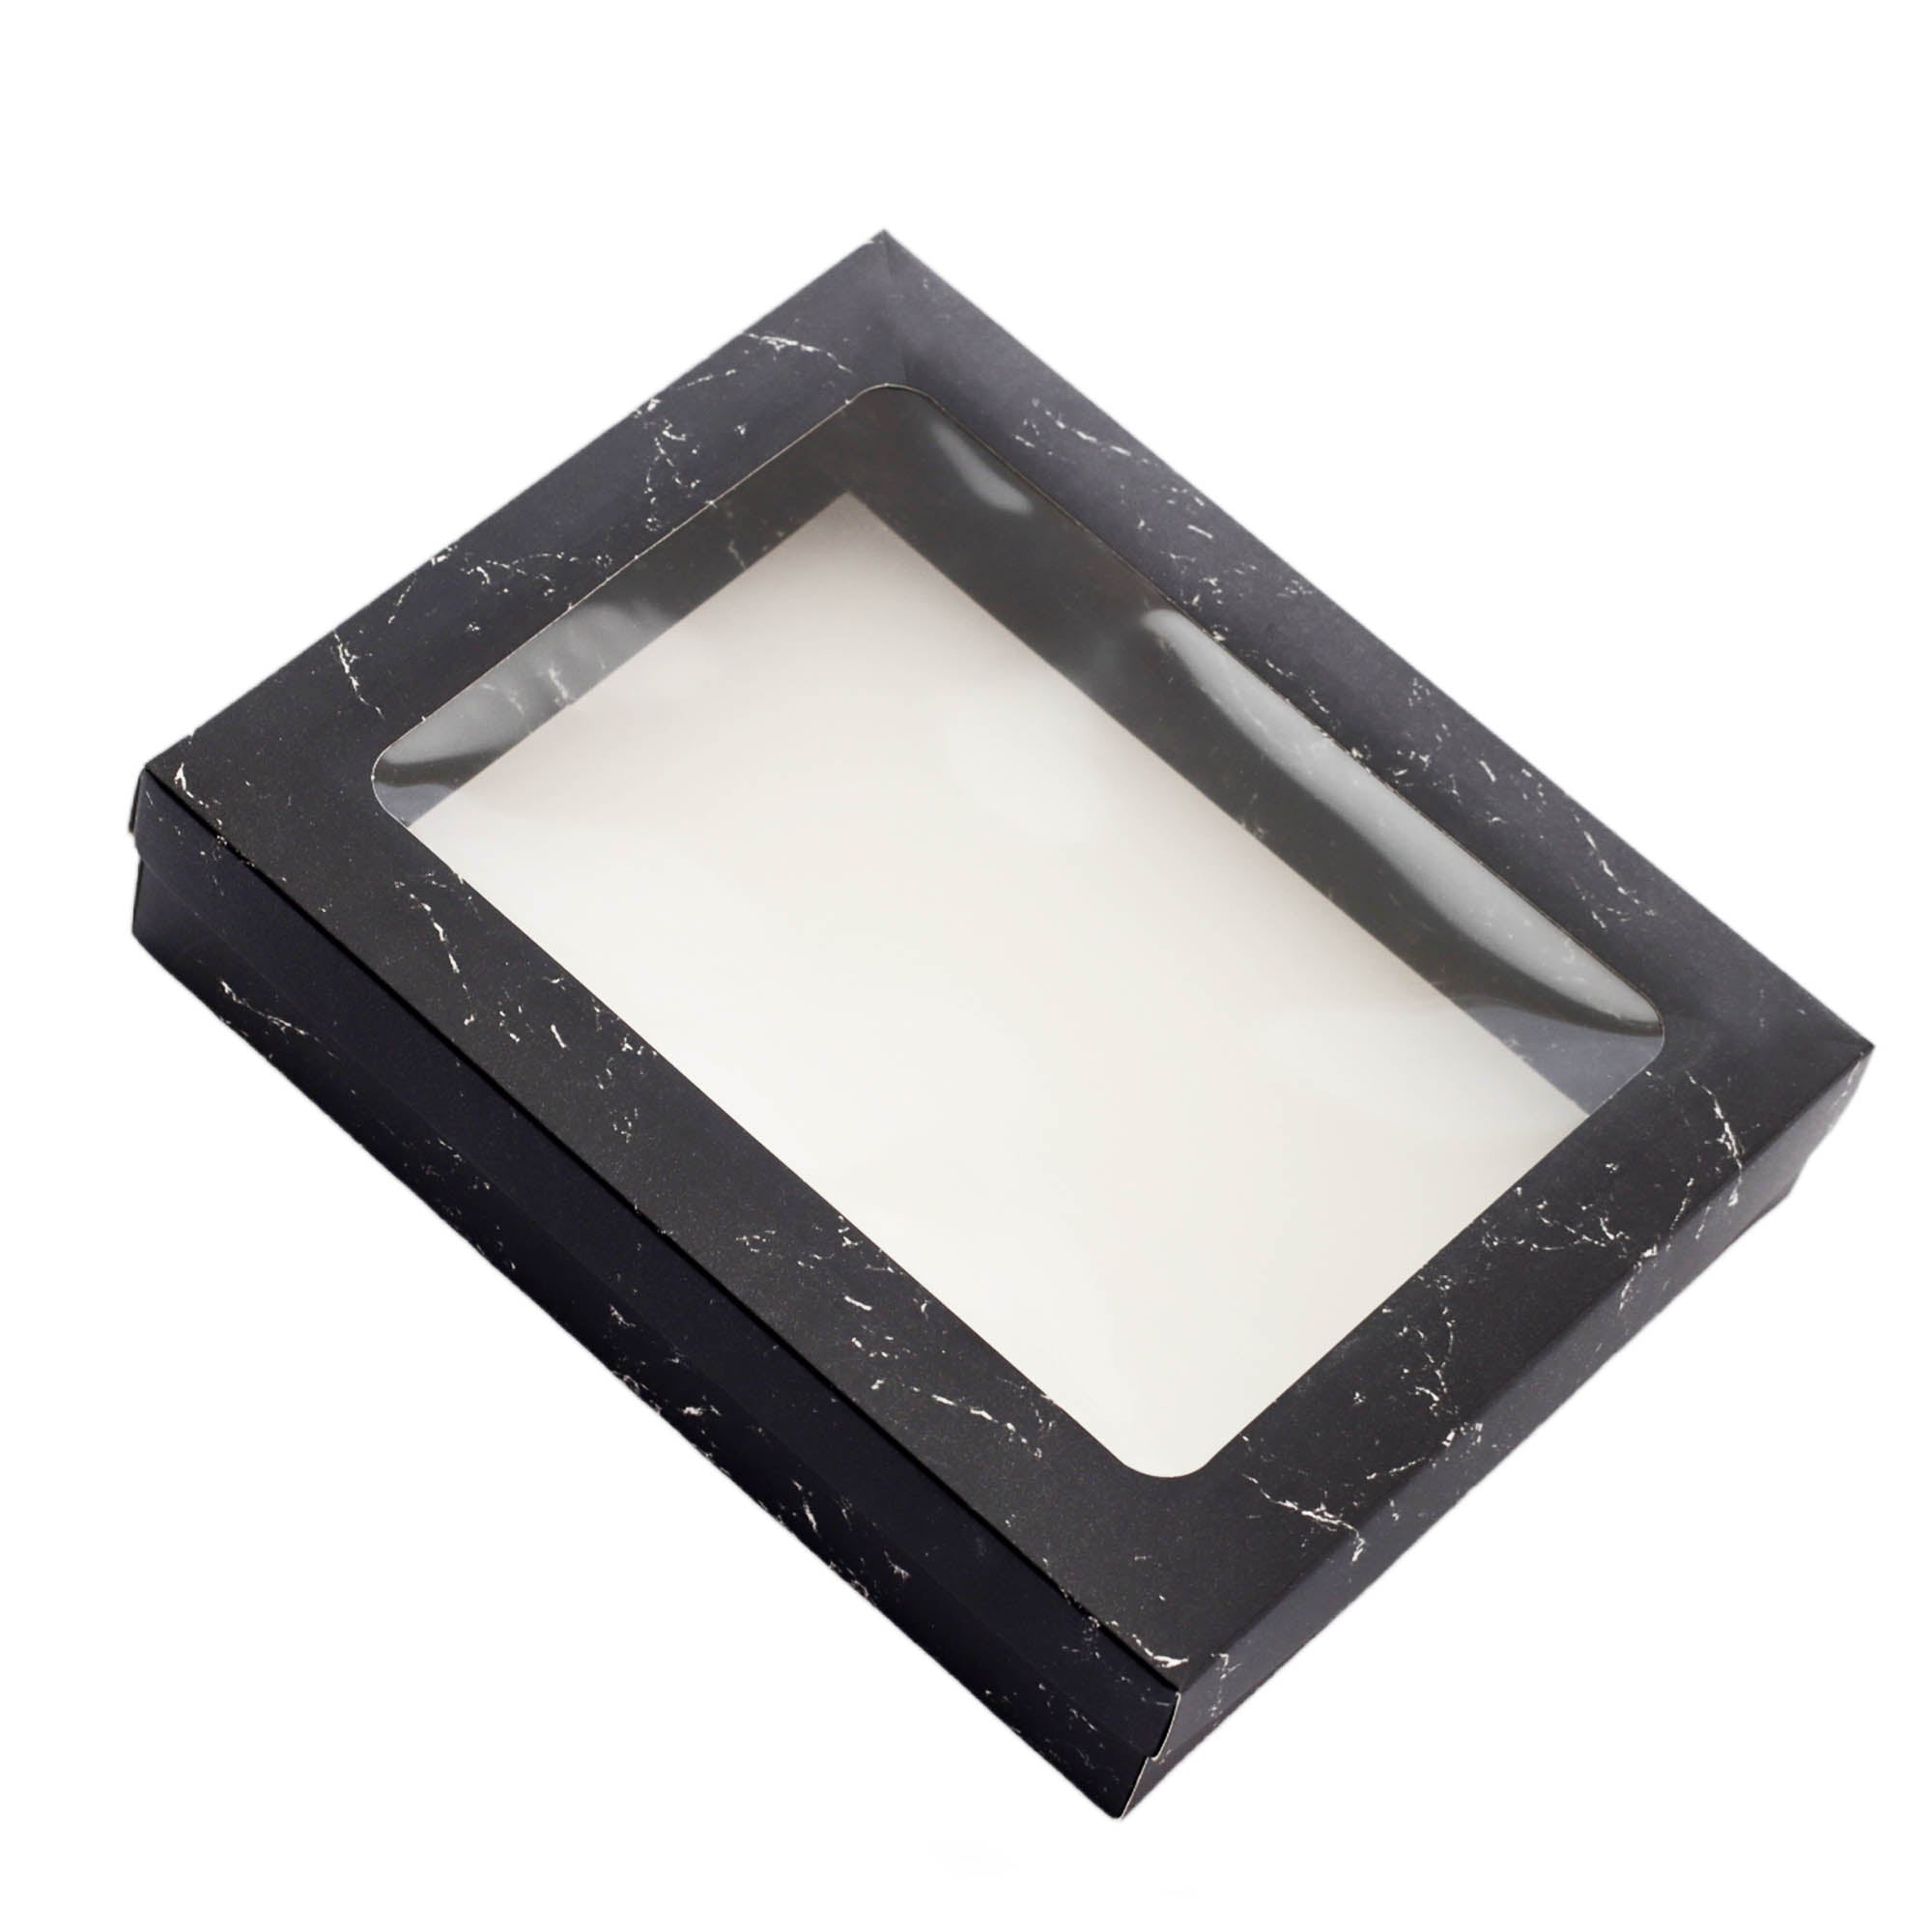 Gift Biscuit Paper Box Rectangle Marble Finish 24x19x5cm XPP606